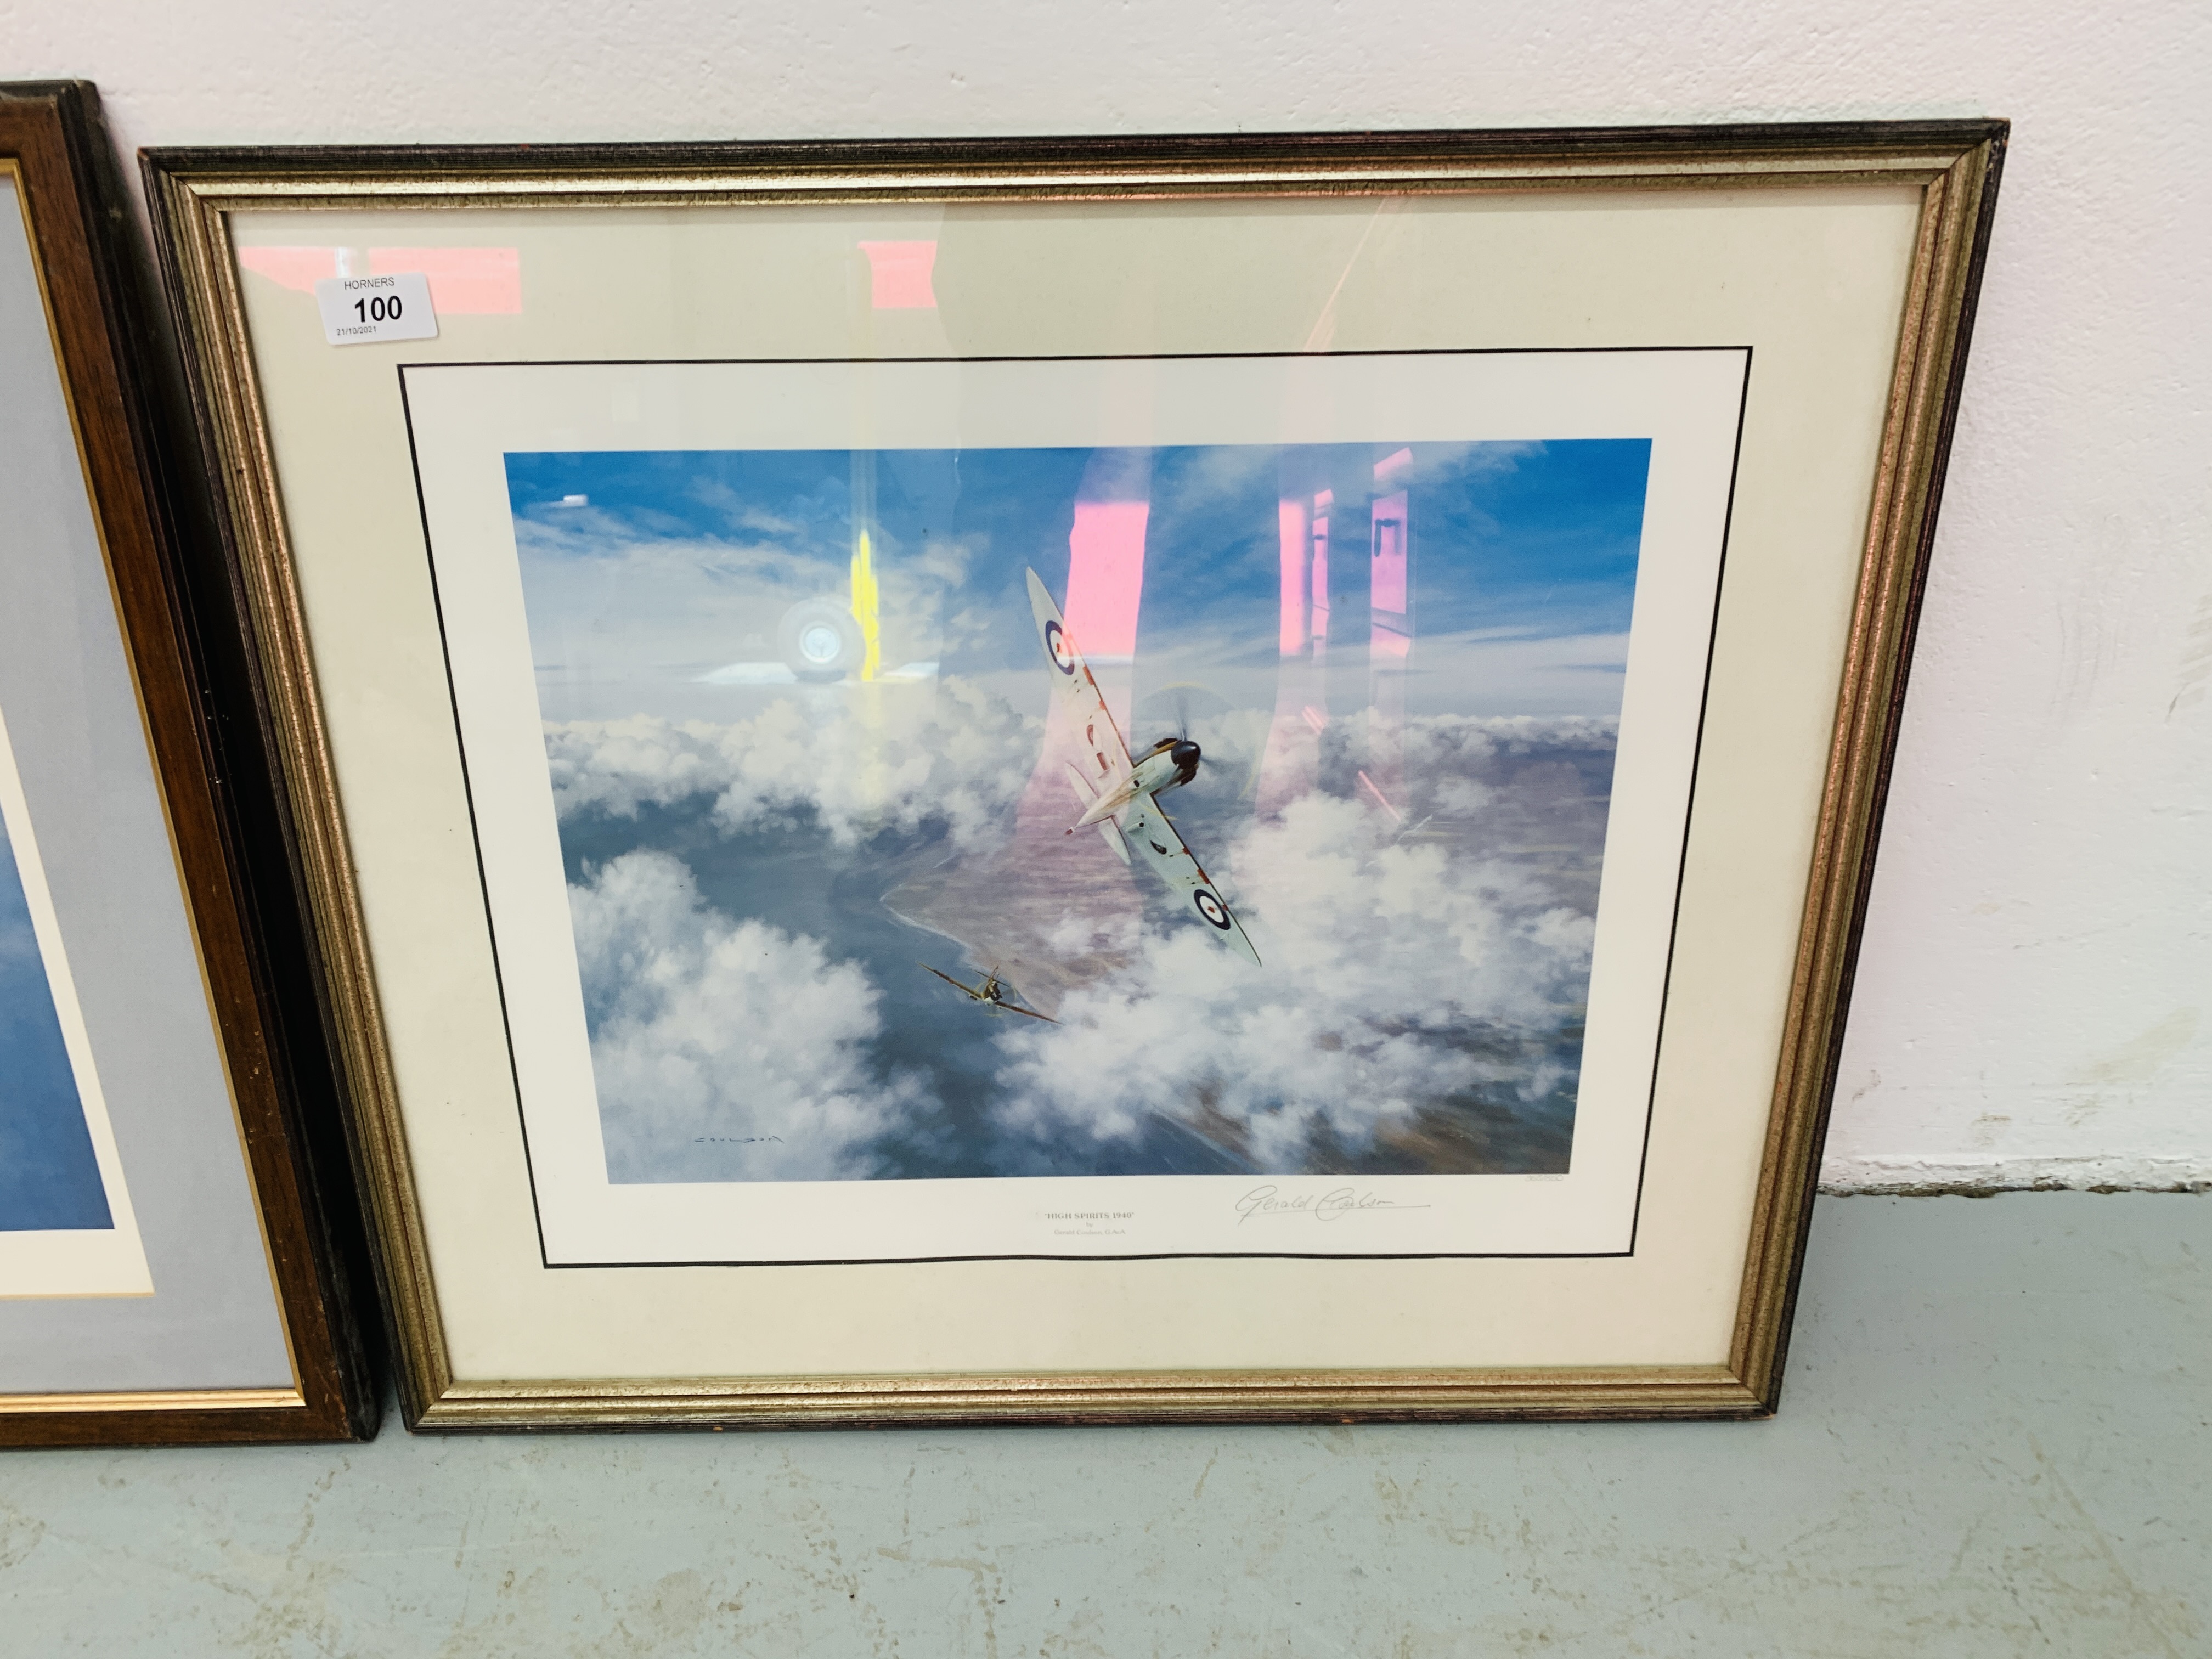 2 FRAMED AND MOUNTED FIGHTER PLANE PRINTS "HIGH SPIRITS" 1940, - Image 2 of 5